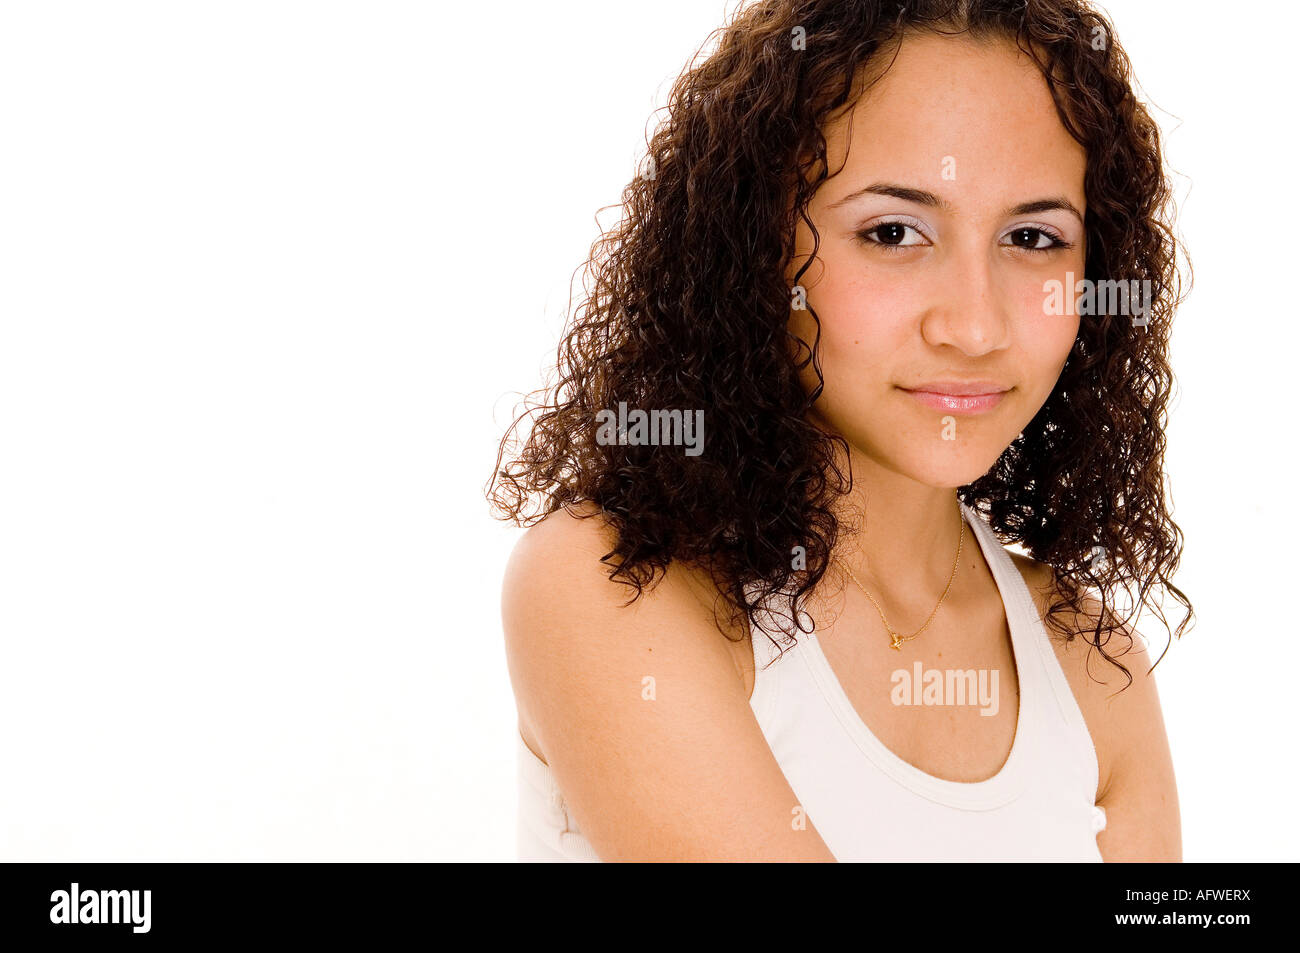 An Attractive Yet Demure Young Woman in Beige on White Stock Photo